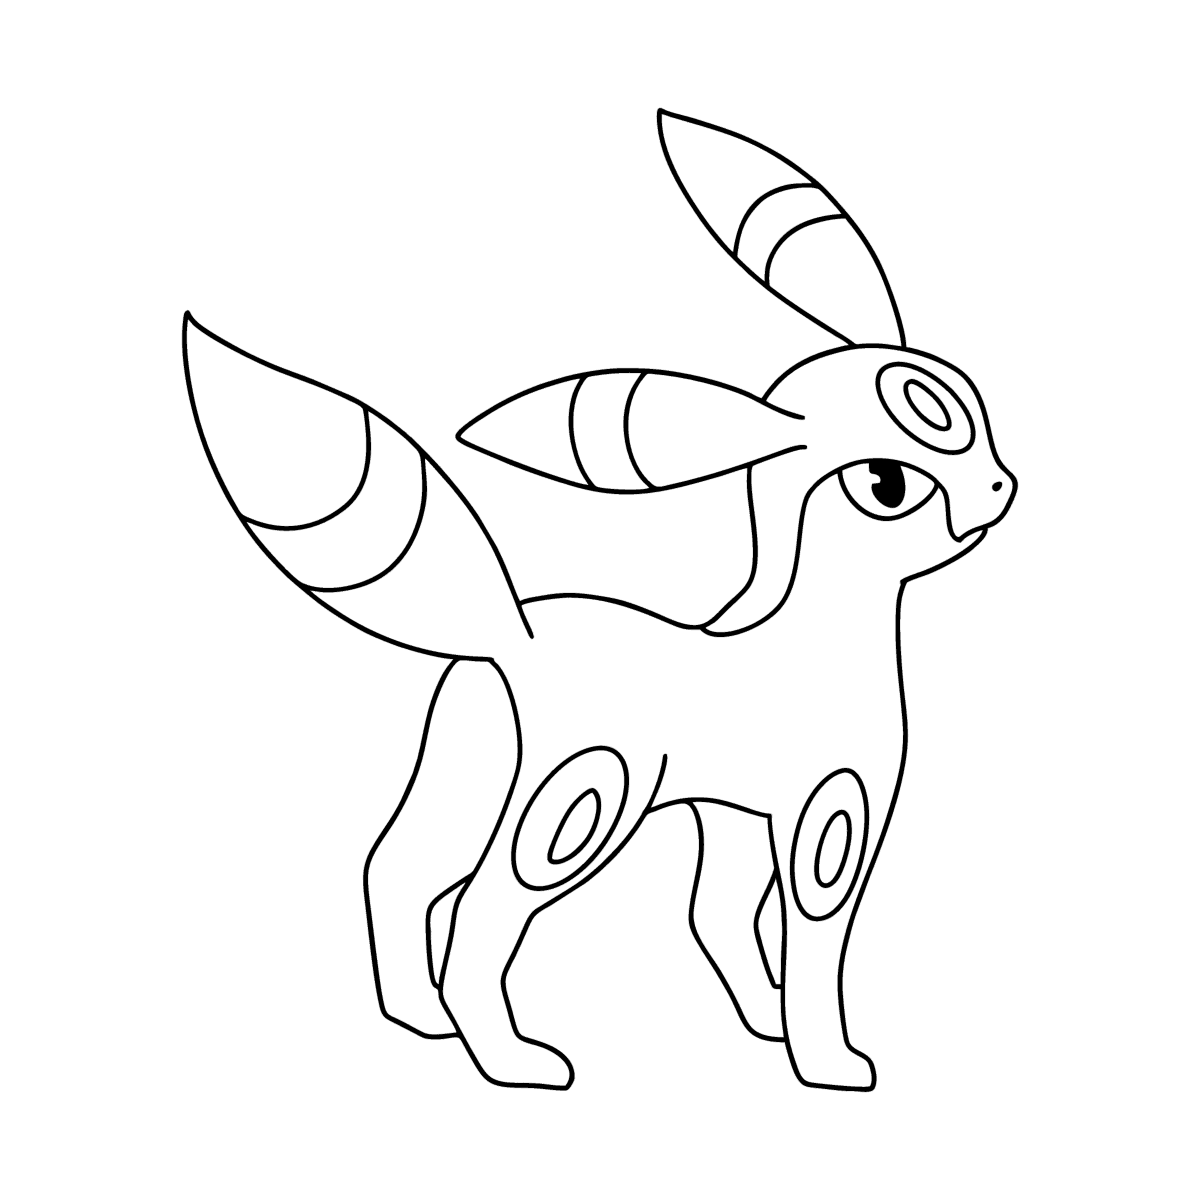 Coloring page Pokemon Go Umbreon ♥ Online and Print for Free